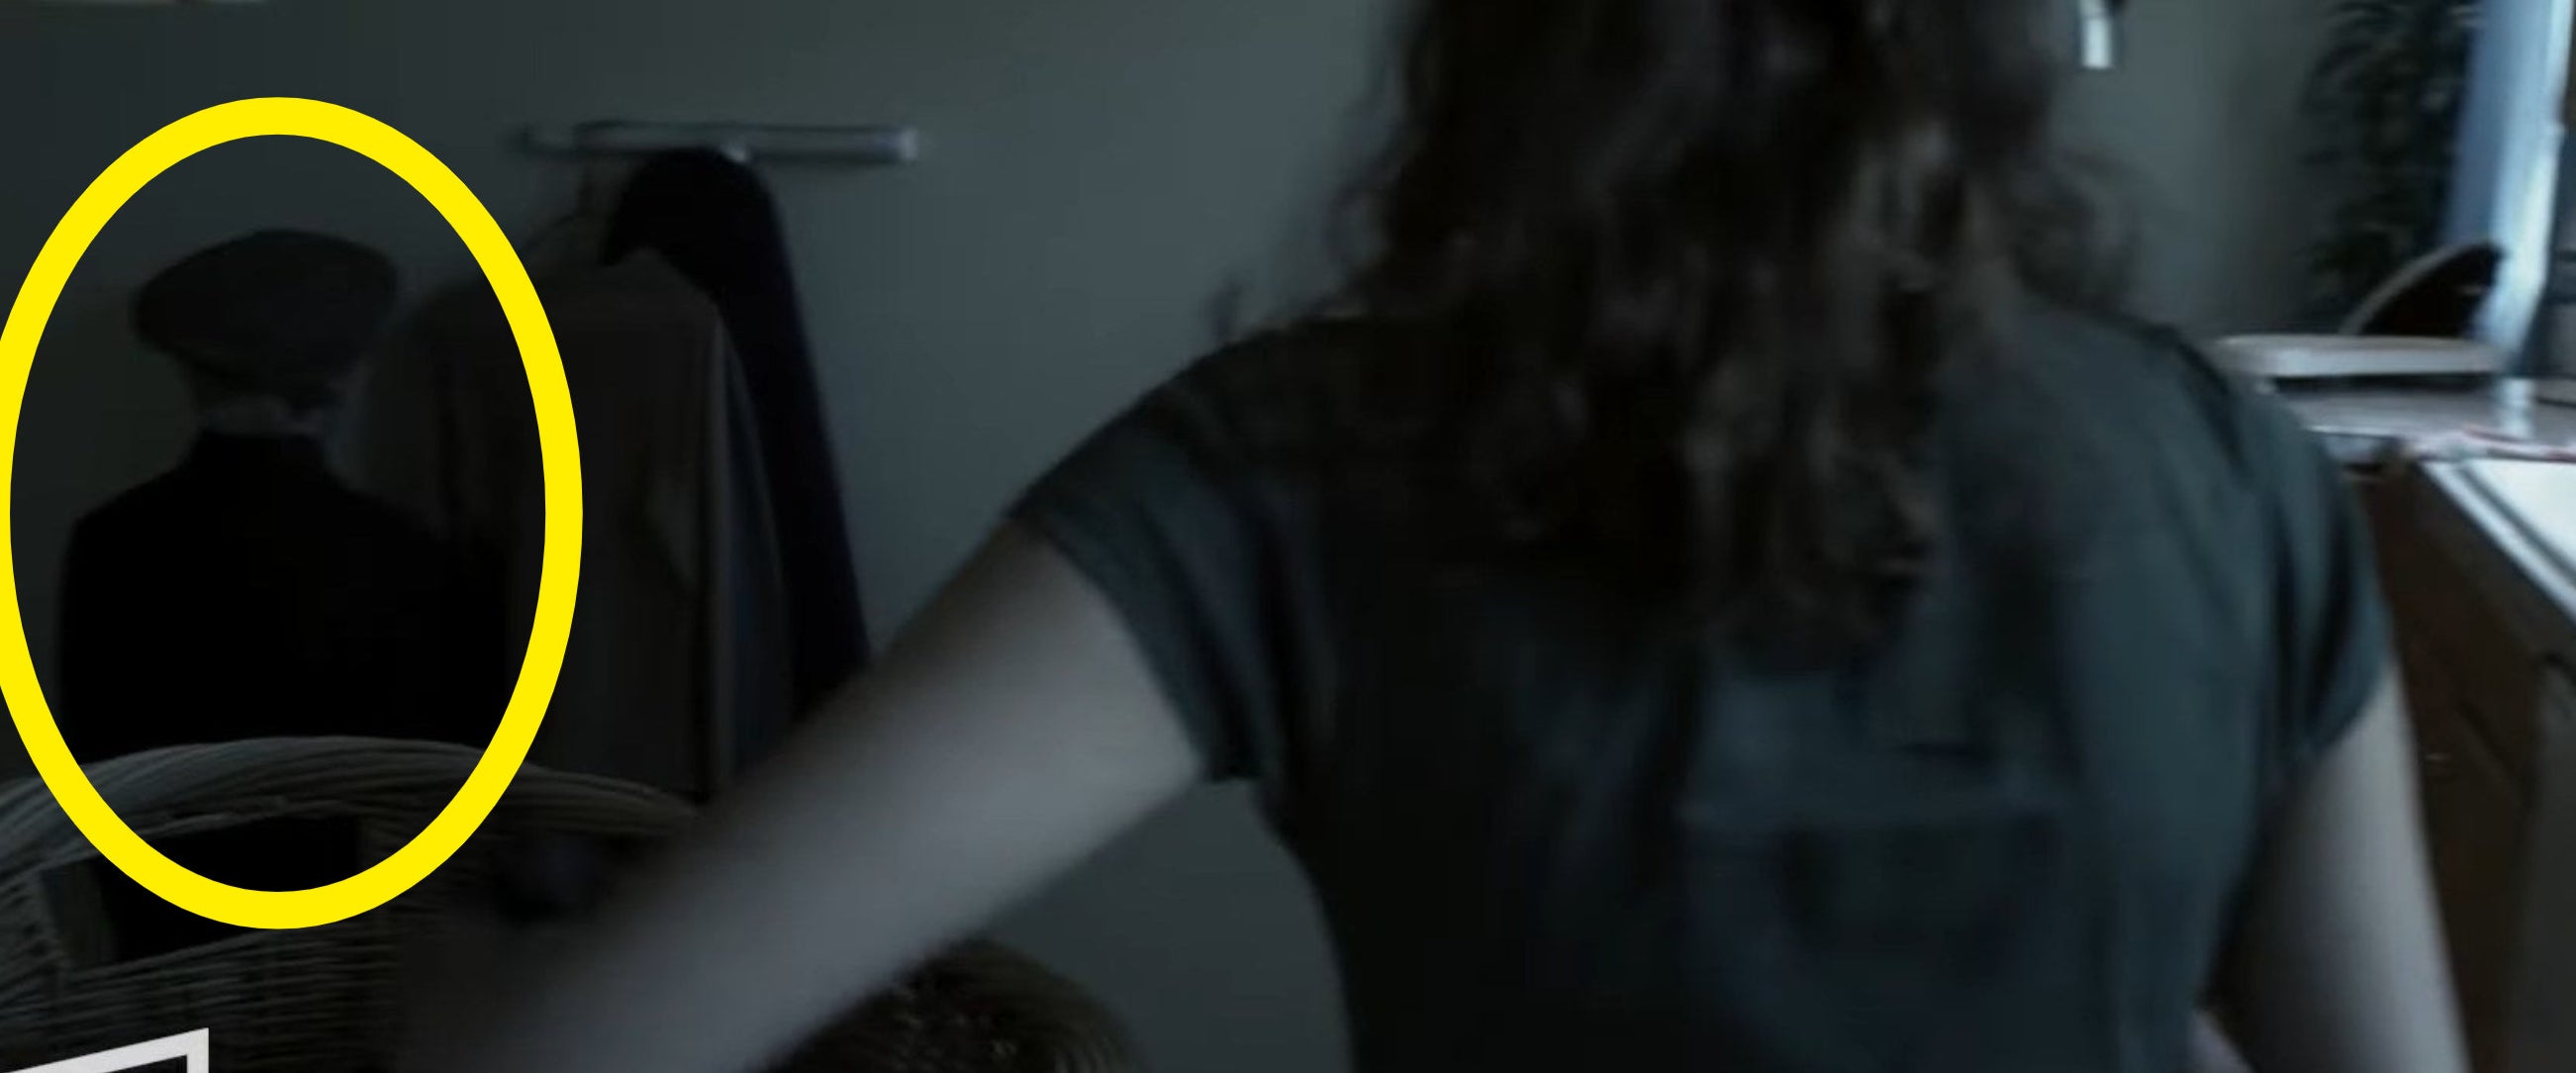 Renai putting laundry into a basket in &quot;Insidious&quot;